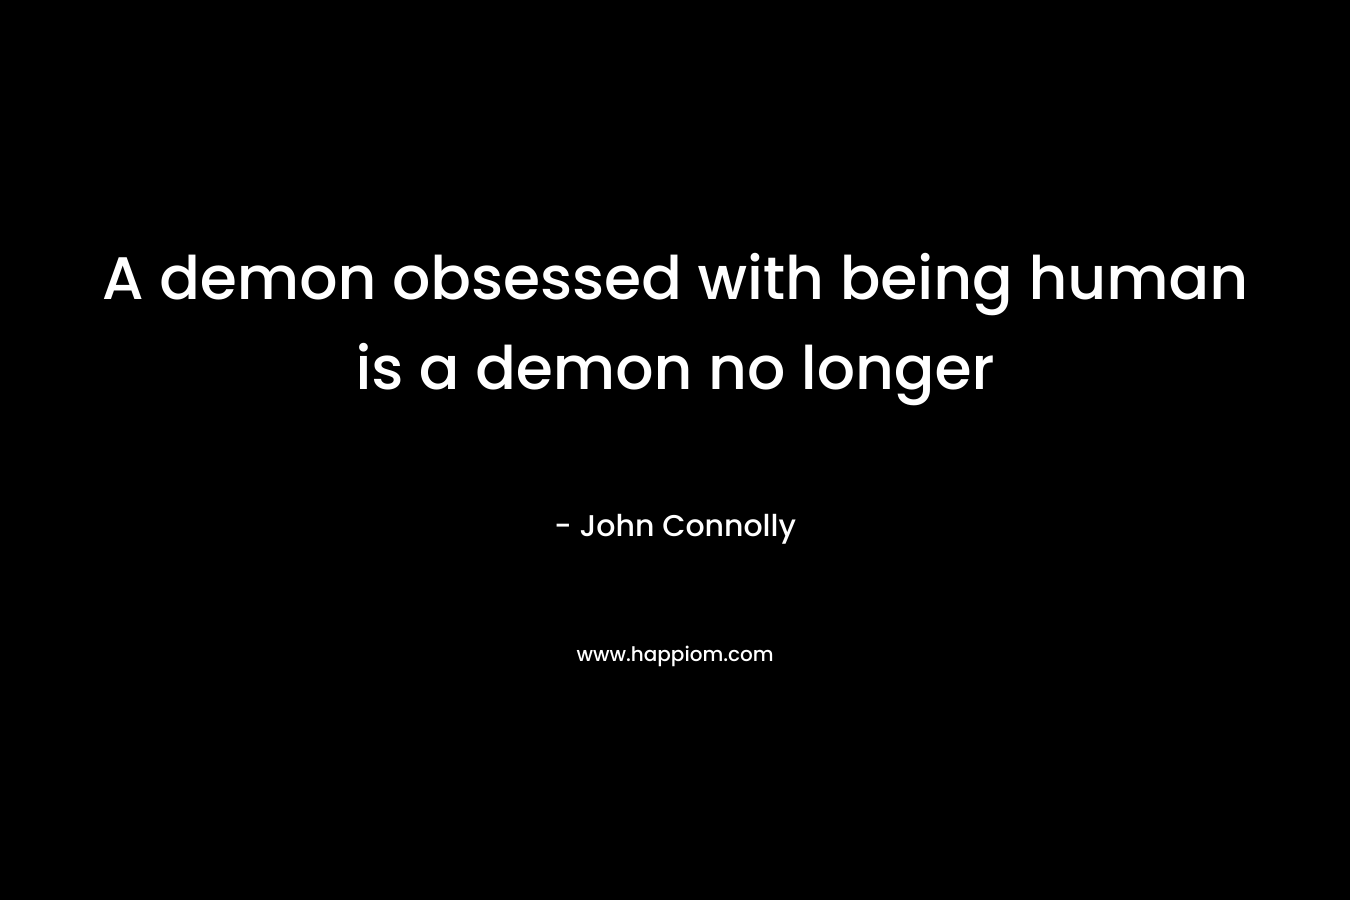 A demon obsessed with being human is a demon no longer – John Connolly